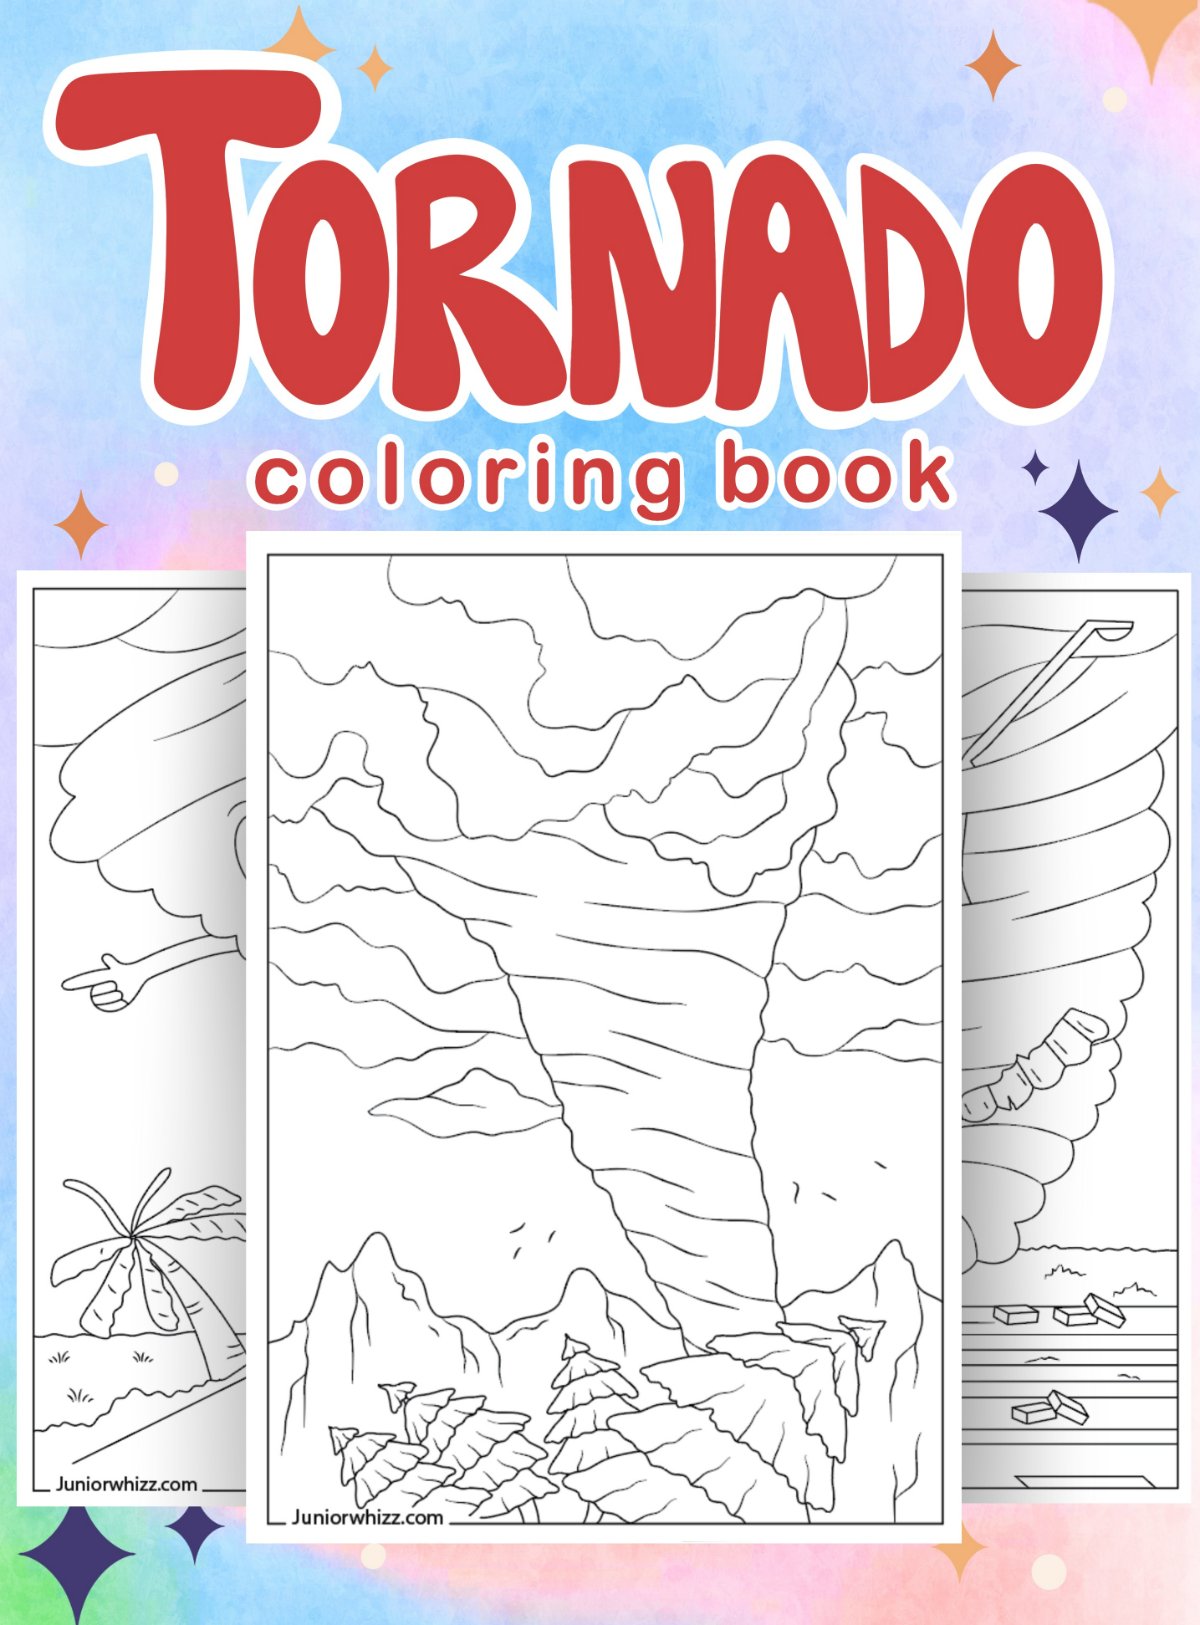 Tornado Coloring Pages For Kids